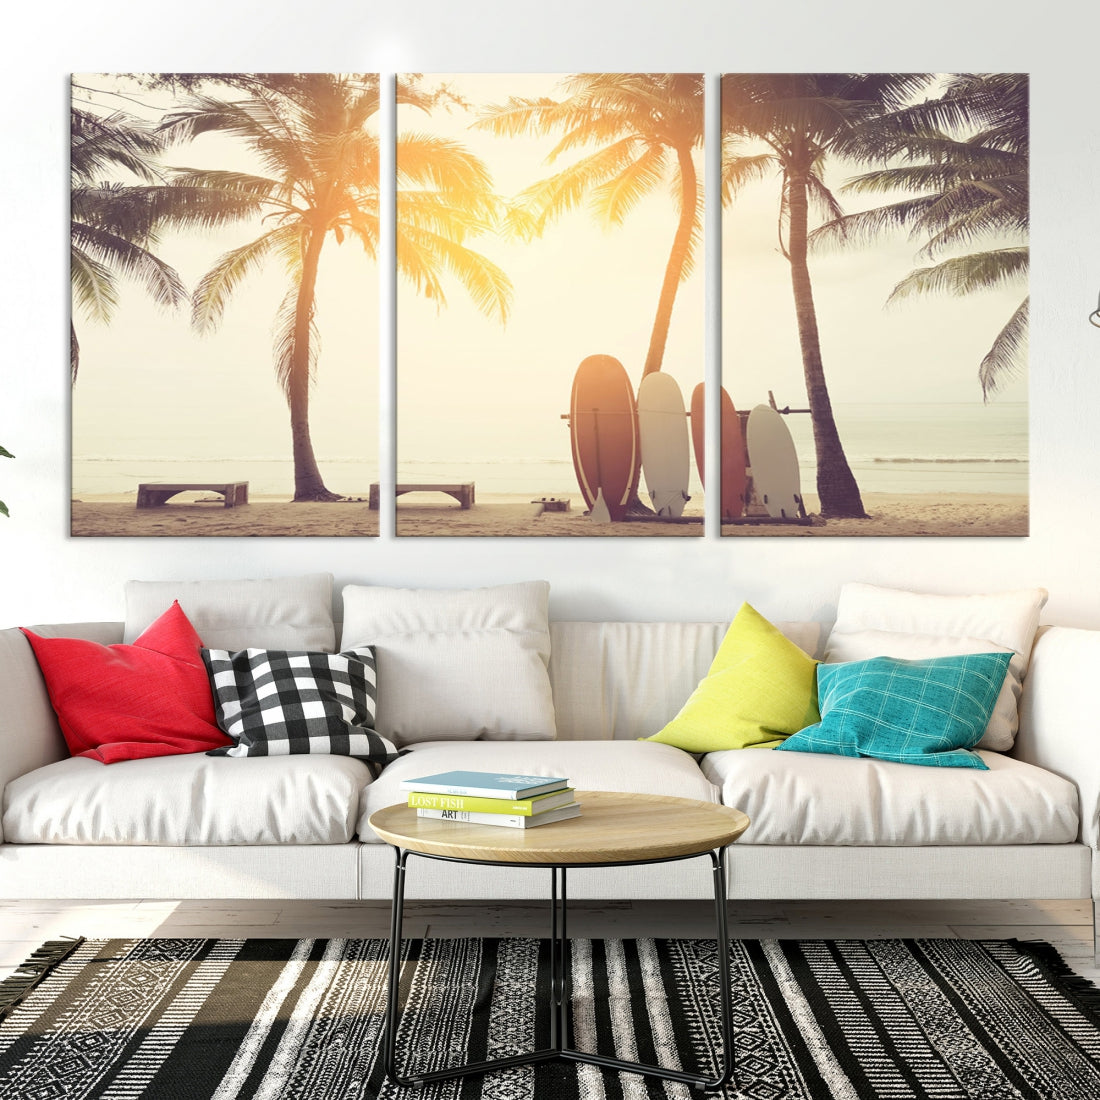 Bring a Piece of the Beach to Your Home with Our Large Canvas Wall Art Print of a Surfboard & Palm TreeA Relaxing